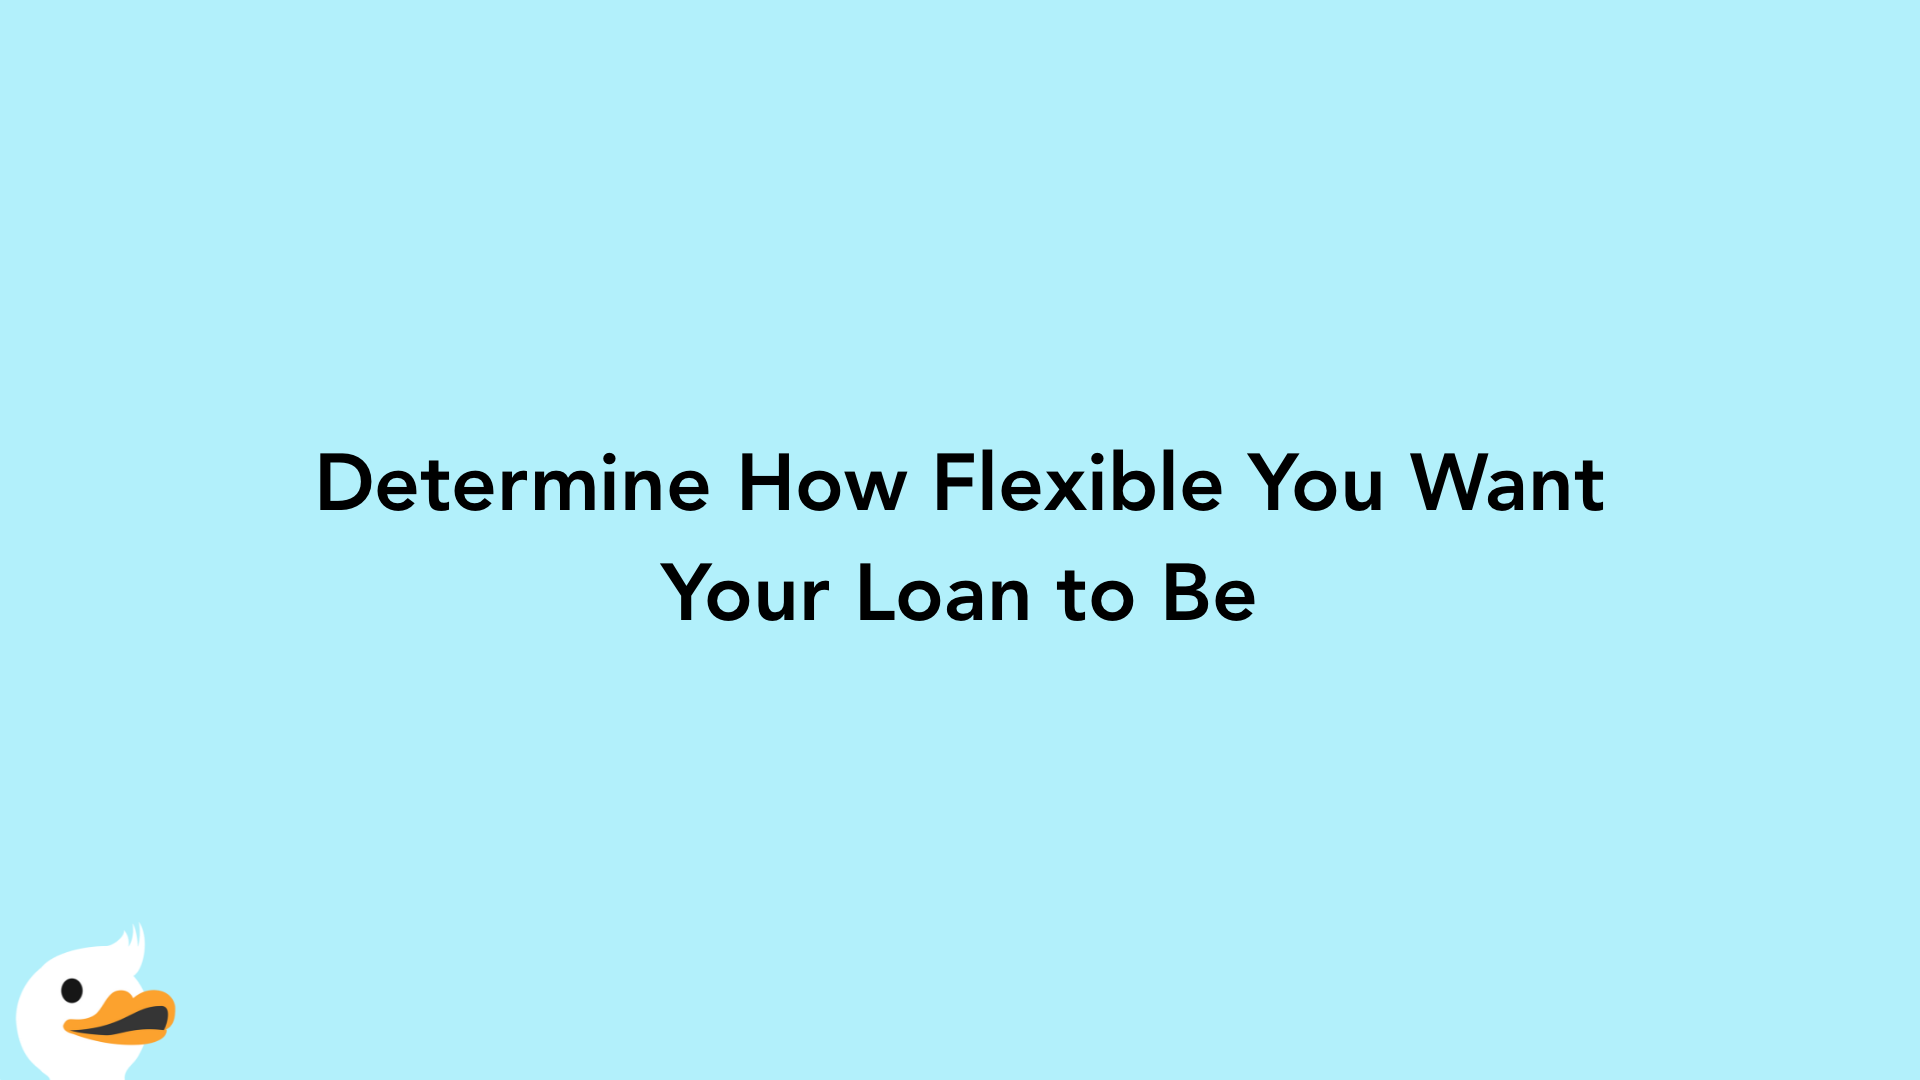 Determine How Flexible You Want Your Loan to Be